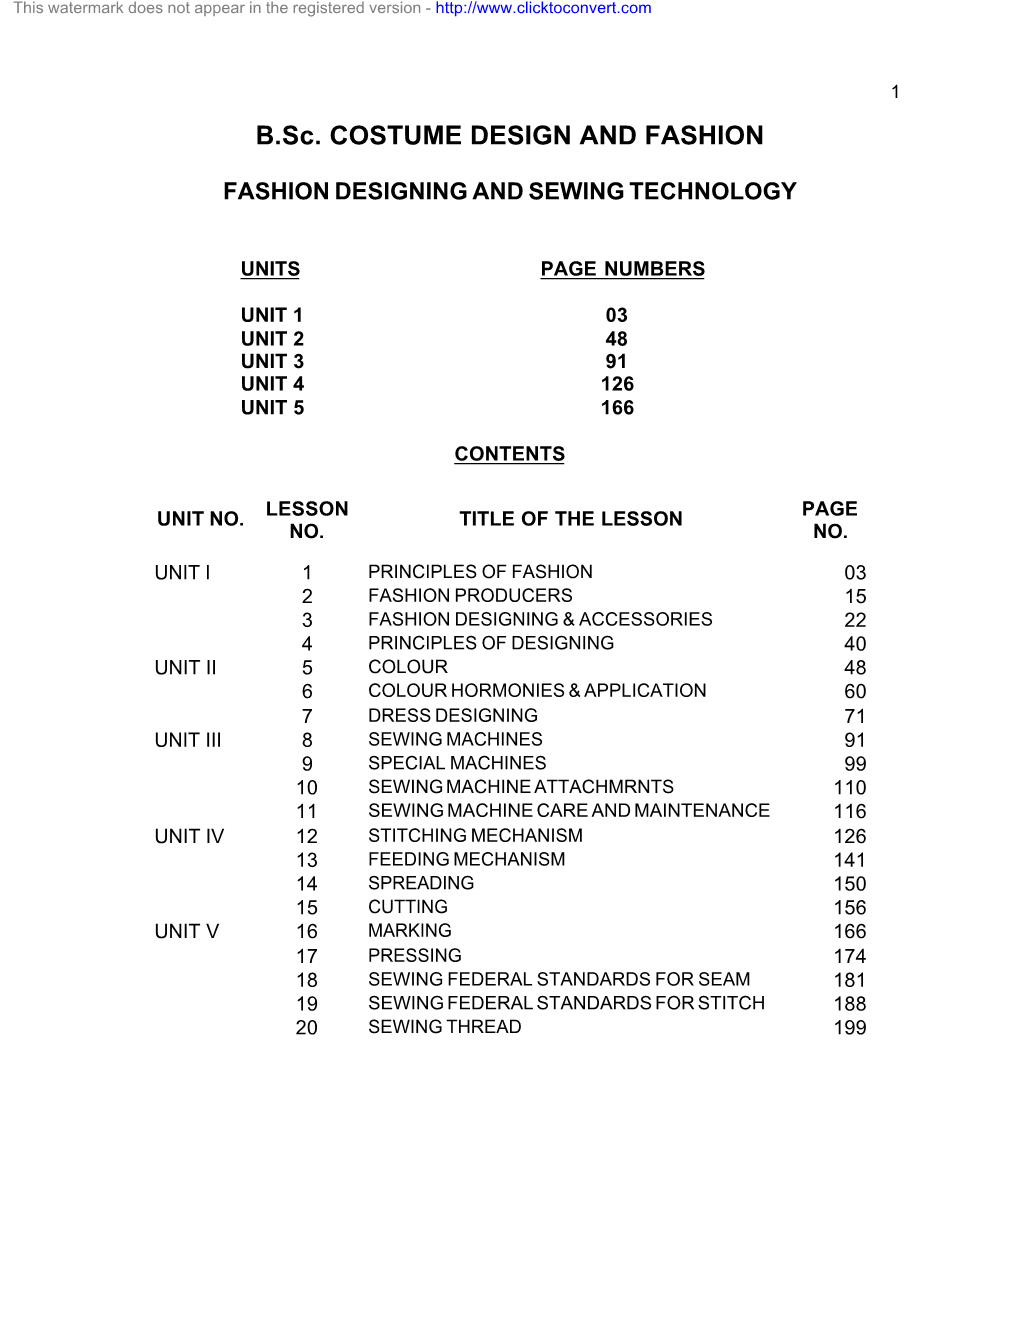 Fashion Designing and Sewing Technology